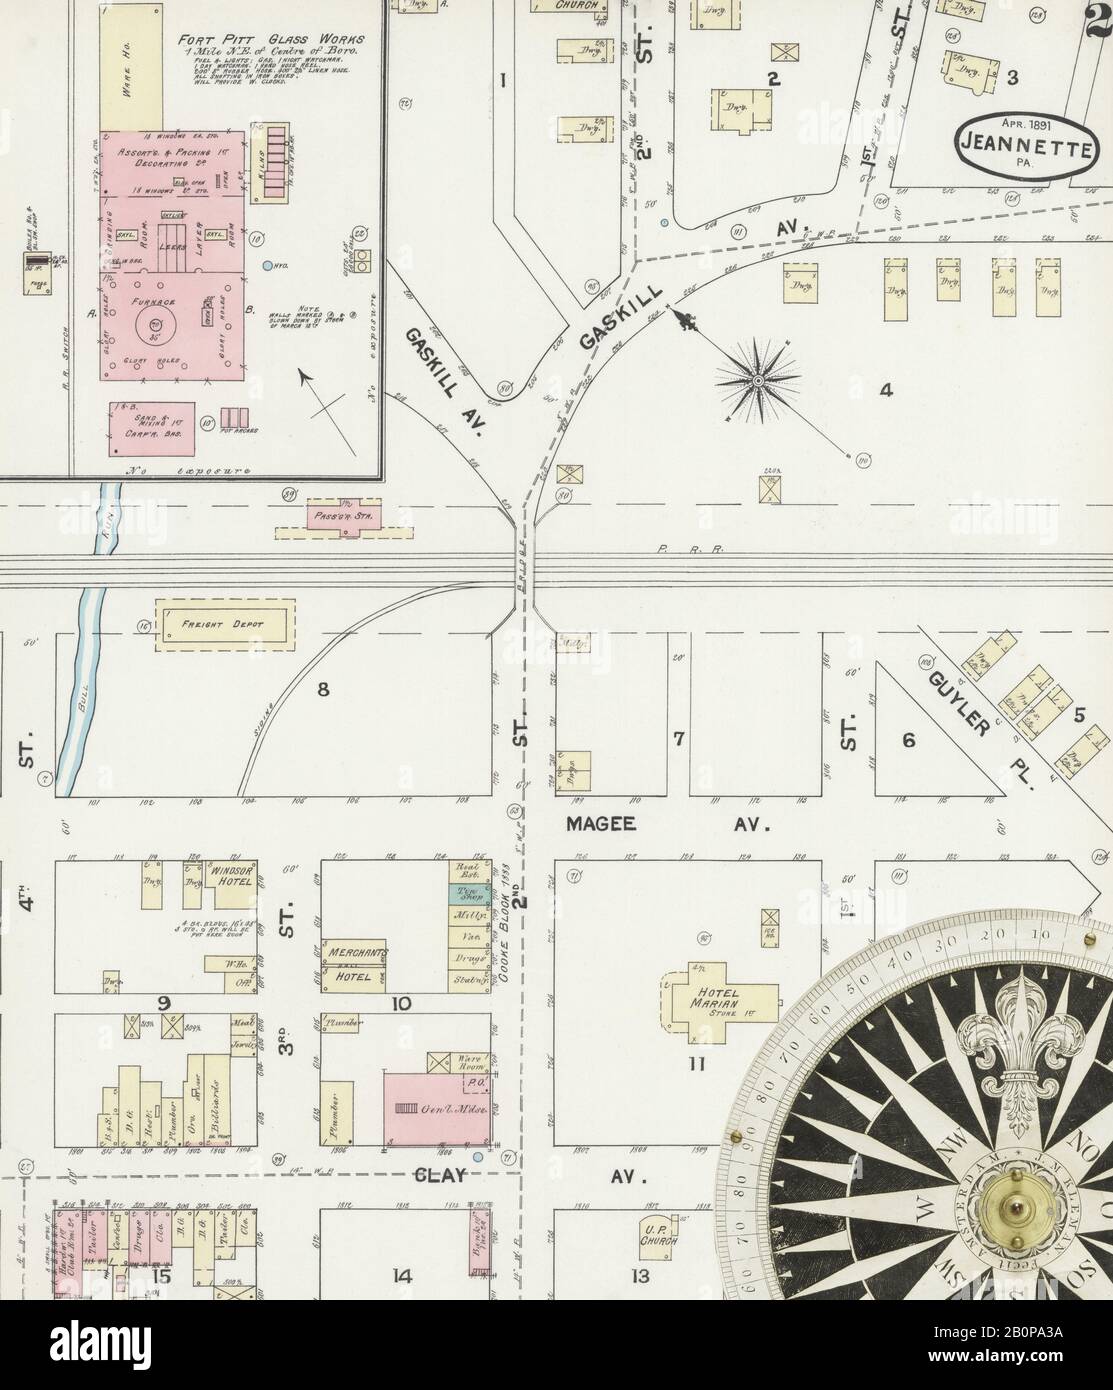 Image 2 of Sanborn Fire Insurance Map from Jeannette, Westmoreland County, Pennsylvania. Apr 1891. 7 Sheet(s), America, street map with a Nineteenth Century compass Stock Photo